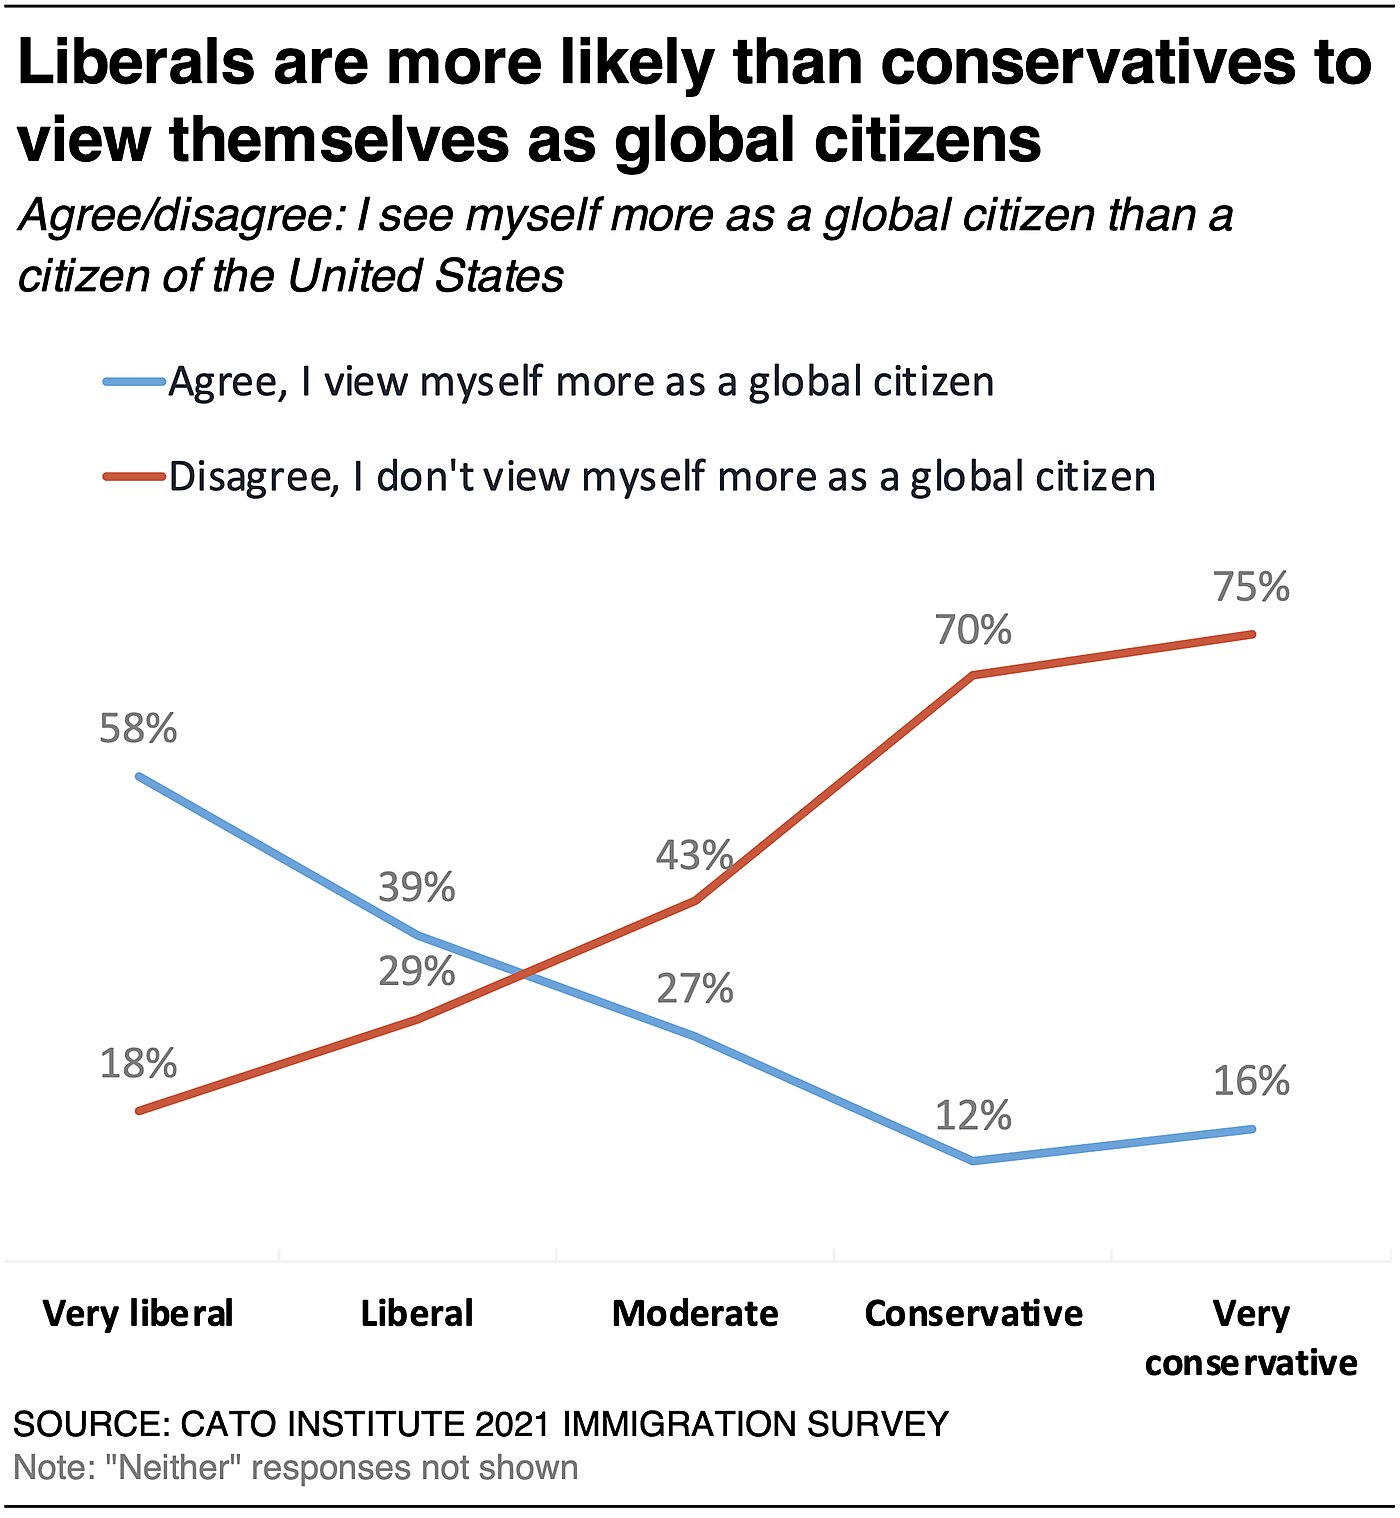 Liberals are more likely than conservatives to view themselves as global citizens